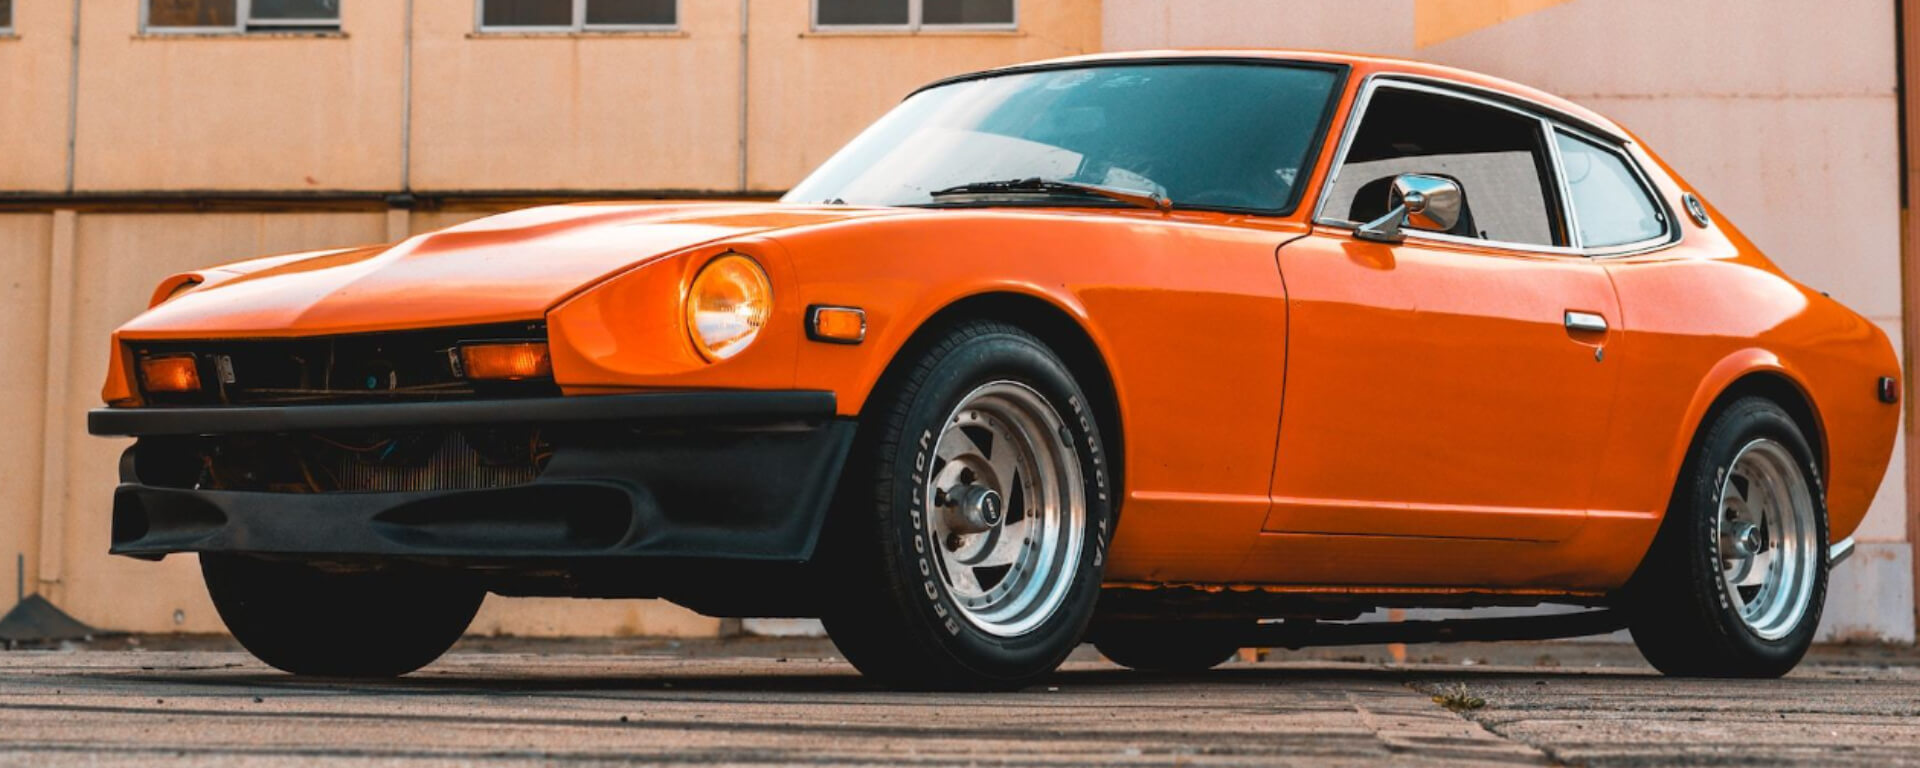 The Top 8 Coolest Japanese Cars Ever Made Header Image